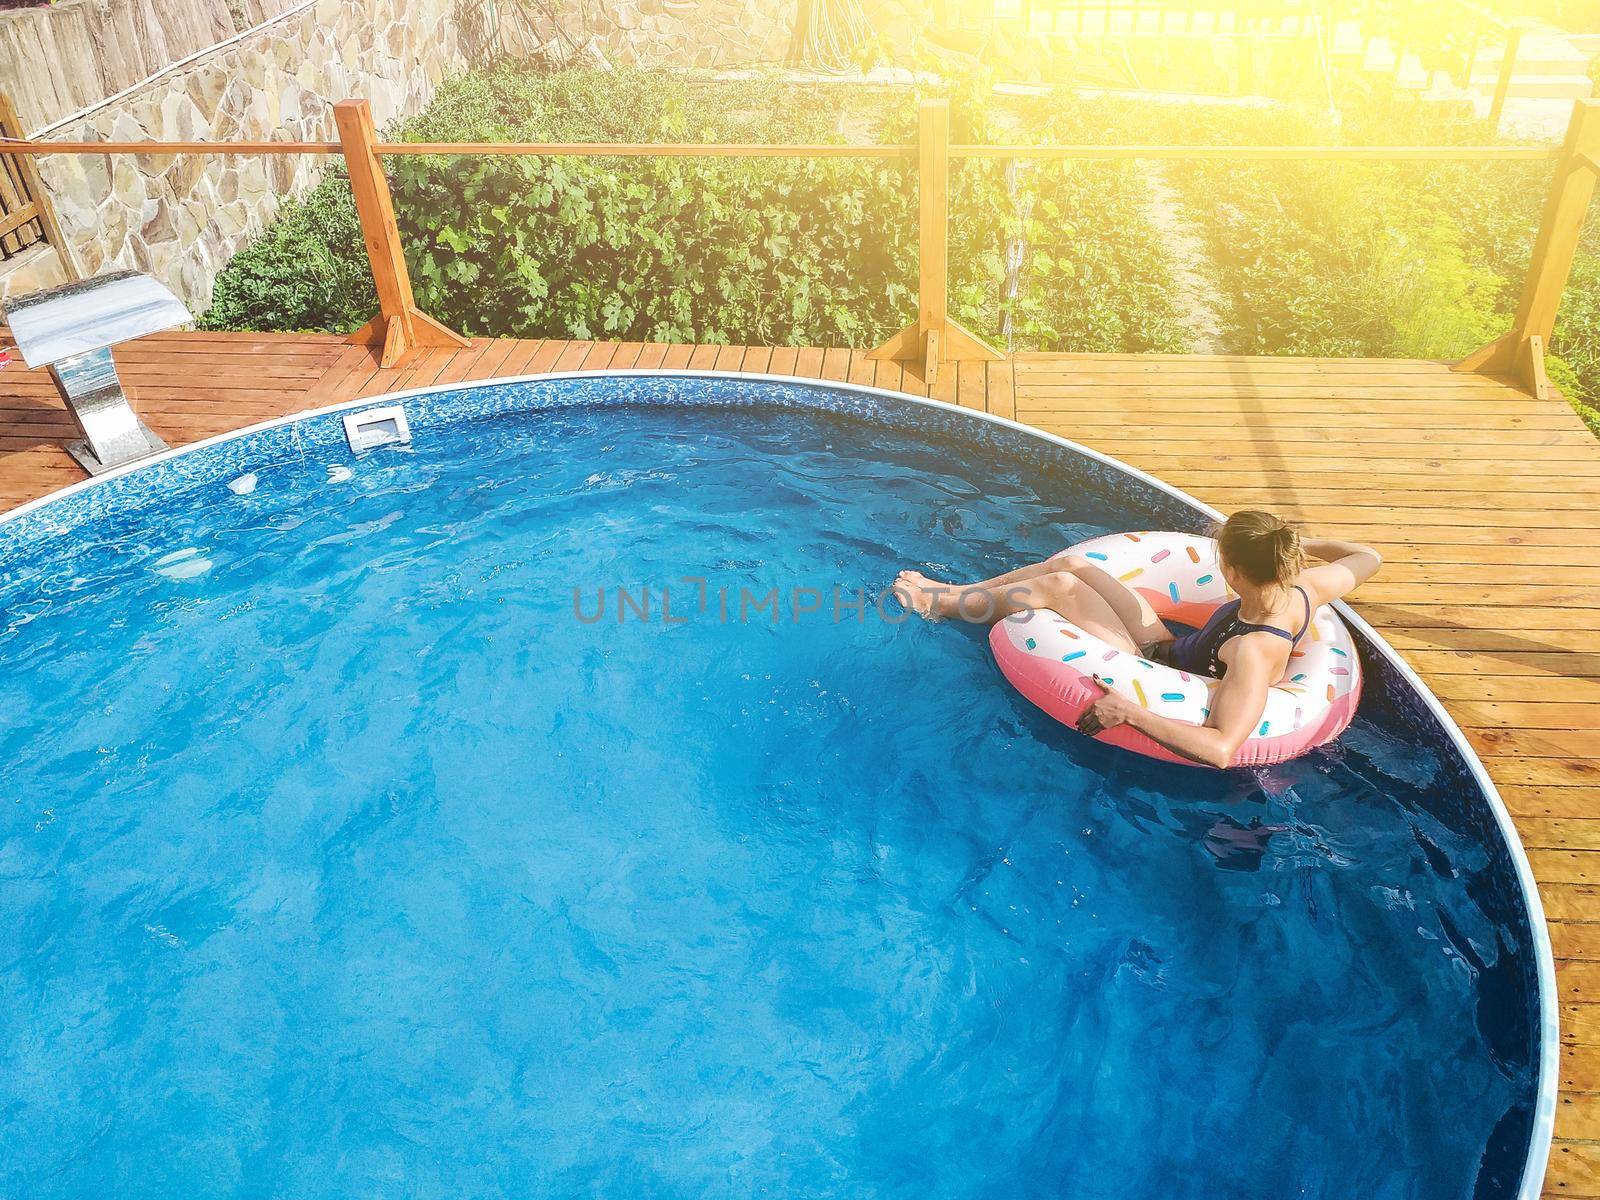 Summer warm vacation.The girl sits on a rubber ring in the form of donut in blue pool in the sun.Time to relax on an air mattress. Having fun in the water for a family vacation.Sea resort.Copy space.